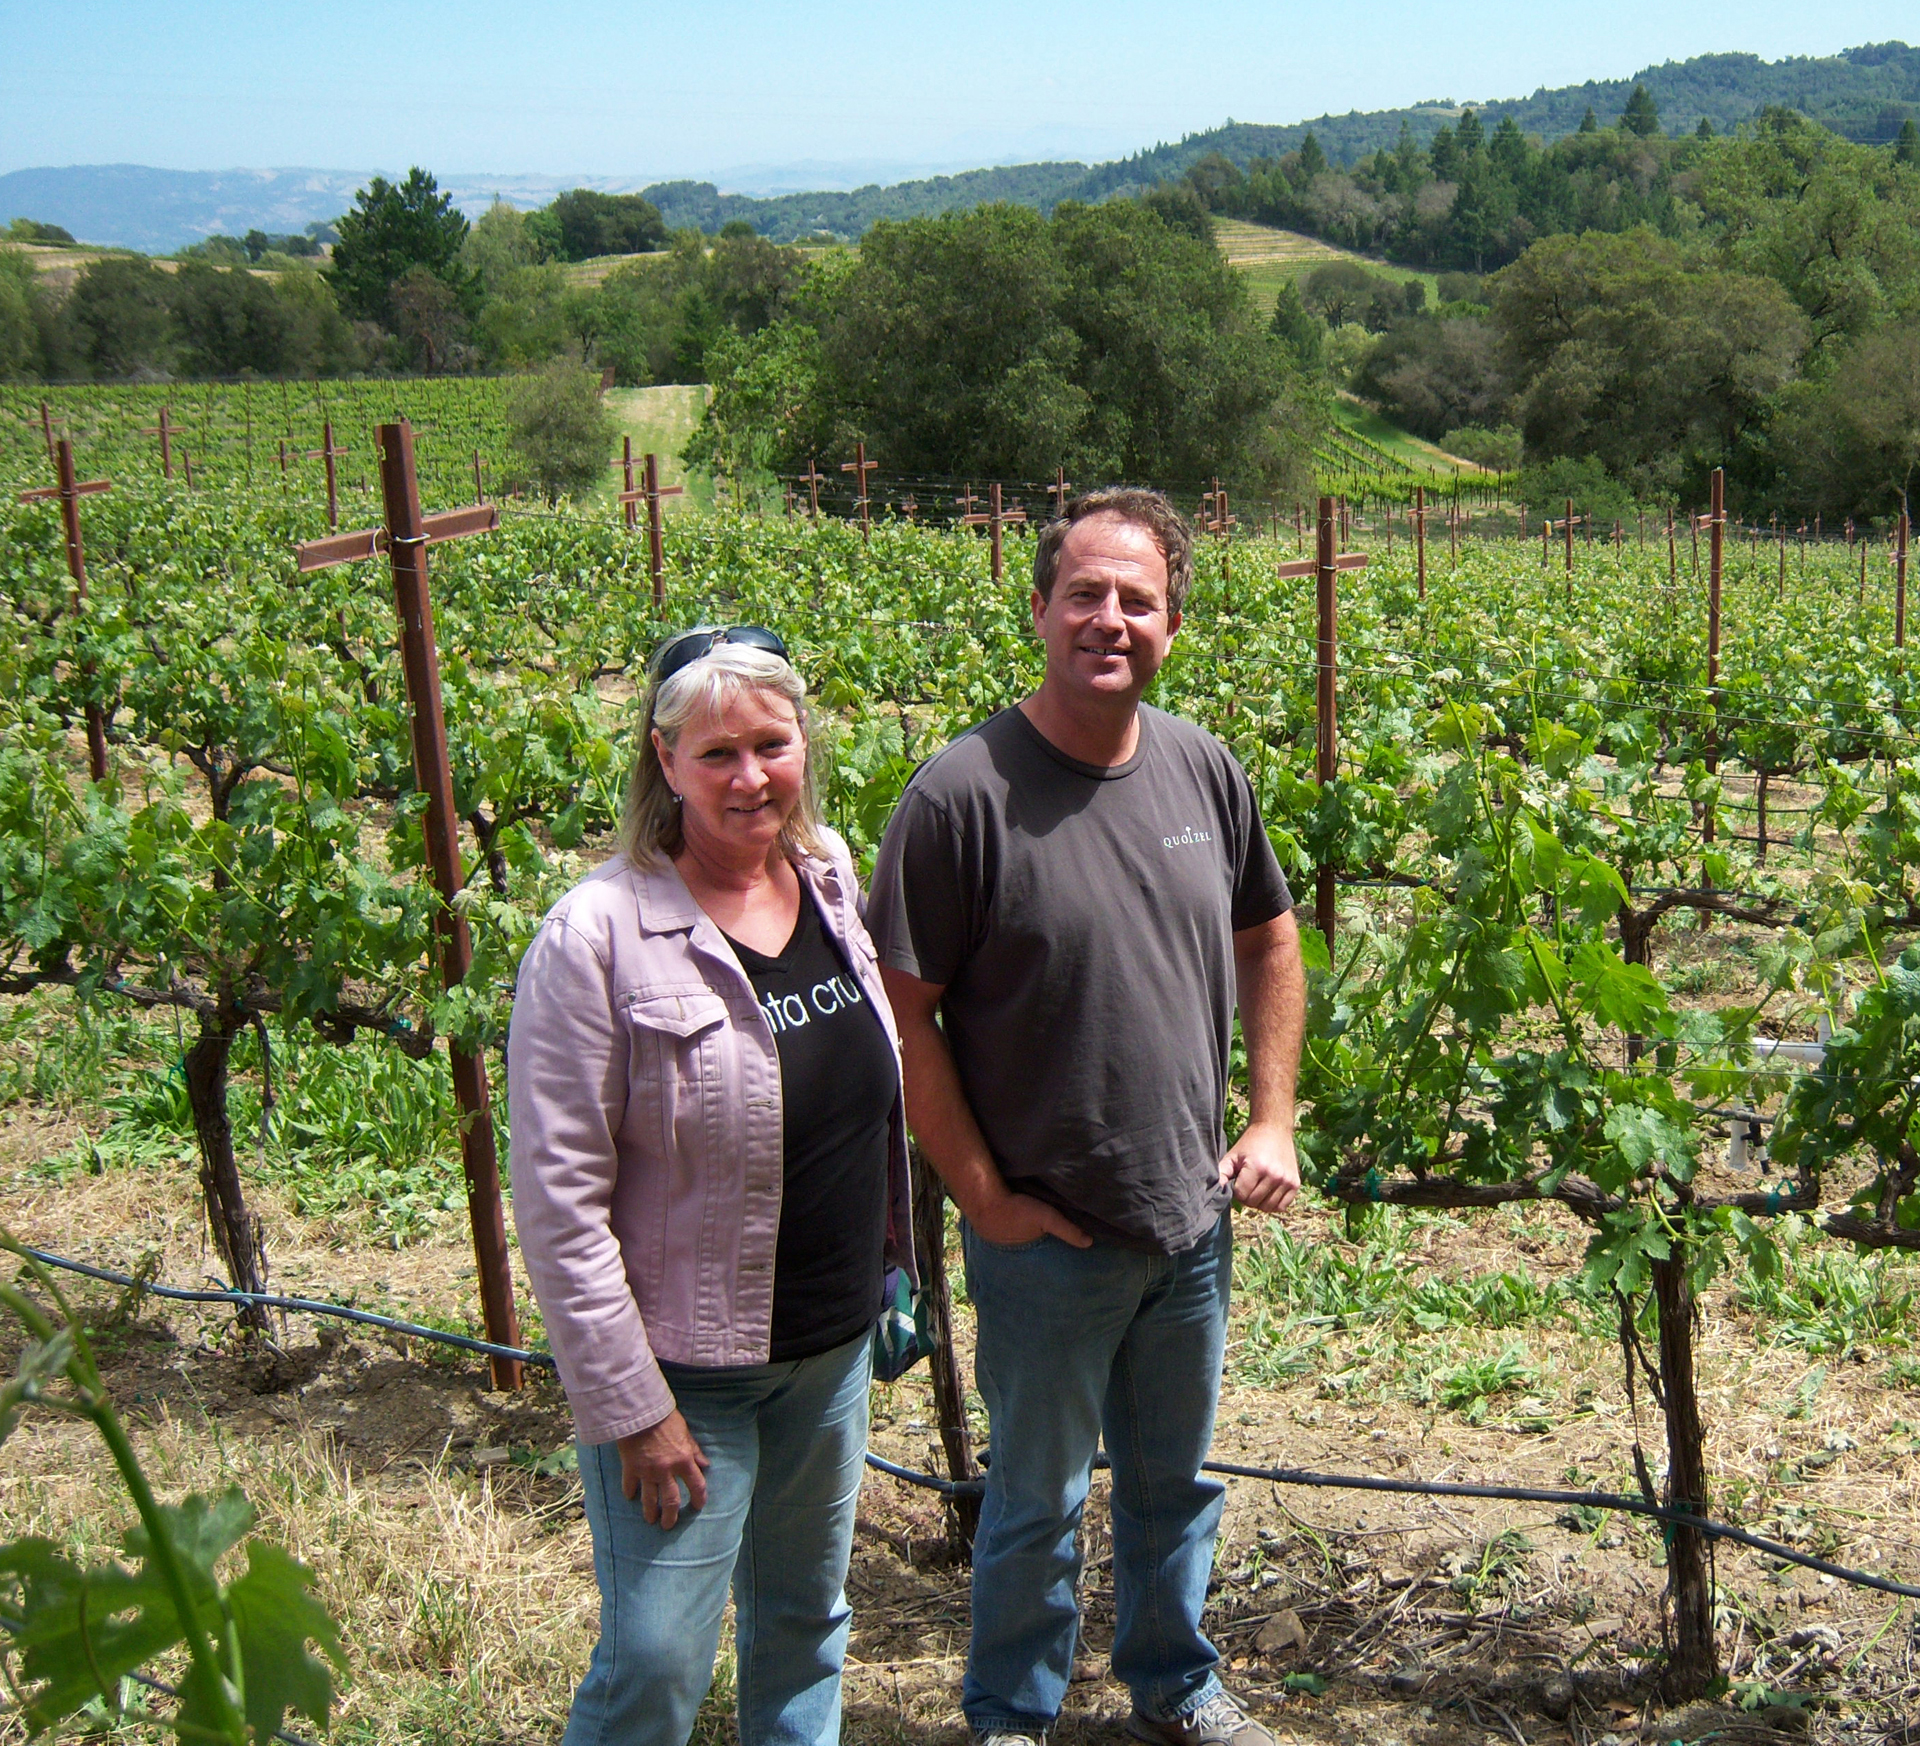 Winemaker Katie Fox and business partner Dan Santa craft wines for home vineyard owners who are often located in wealthy towns in the Santa Cruz Mountains area on each side of the range that faces the coast and the valley.